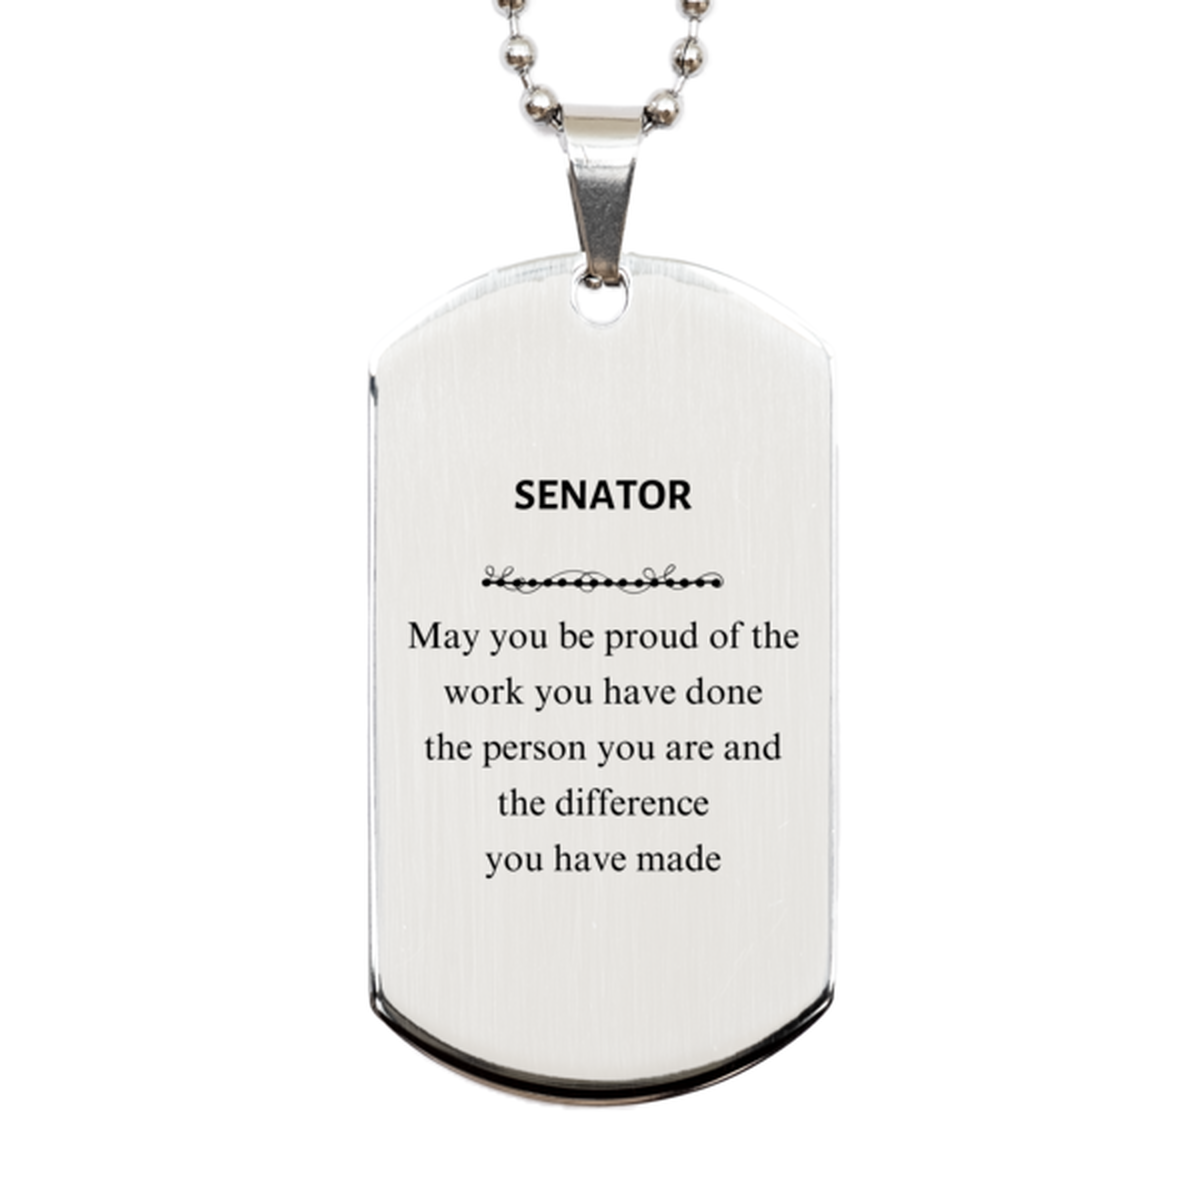 Senator May you be proud of the work you have done, Retirement Senator Silver Dog Tag for Colleague Appreciation Gifts Amazing for Senator